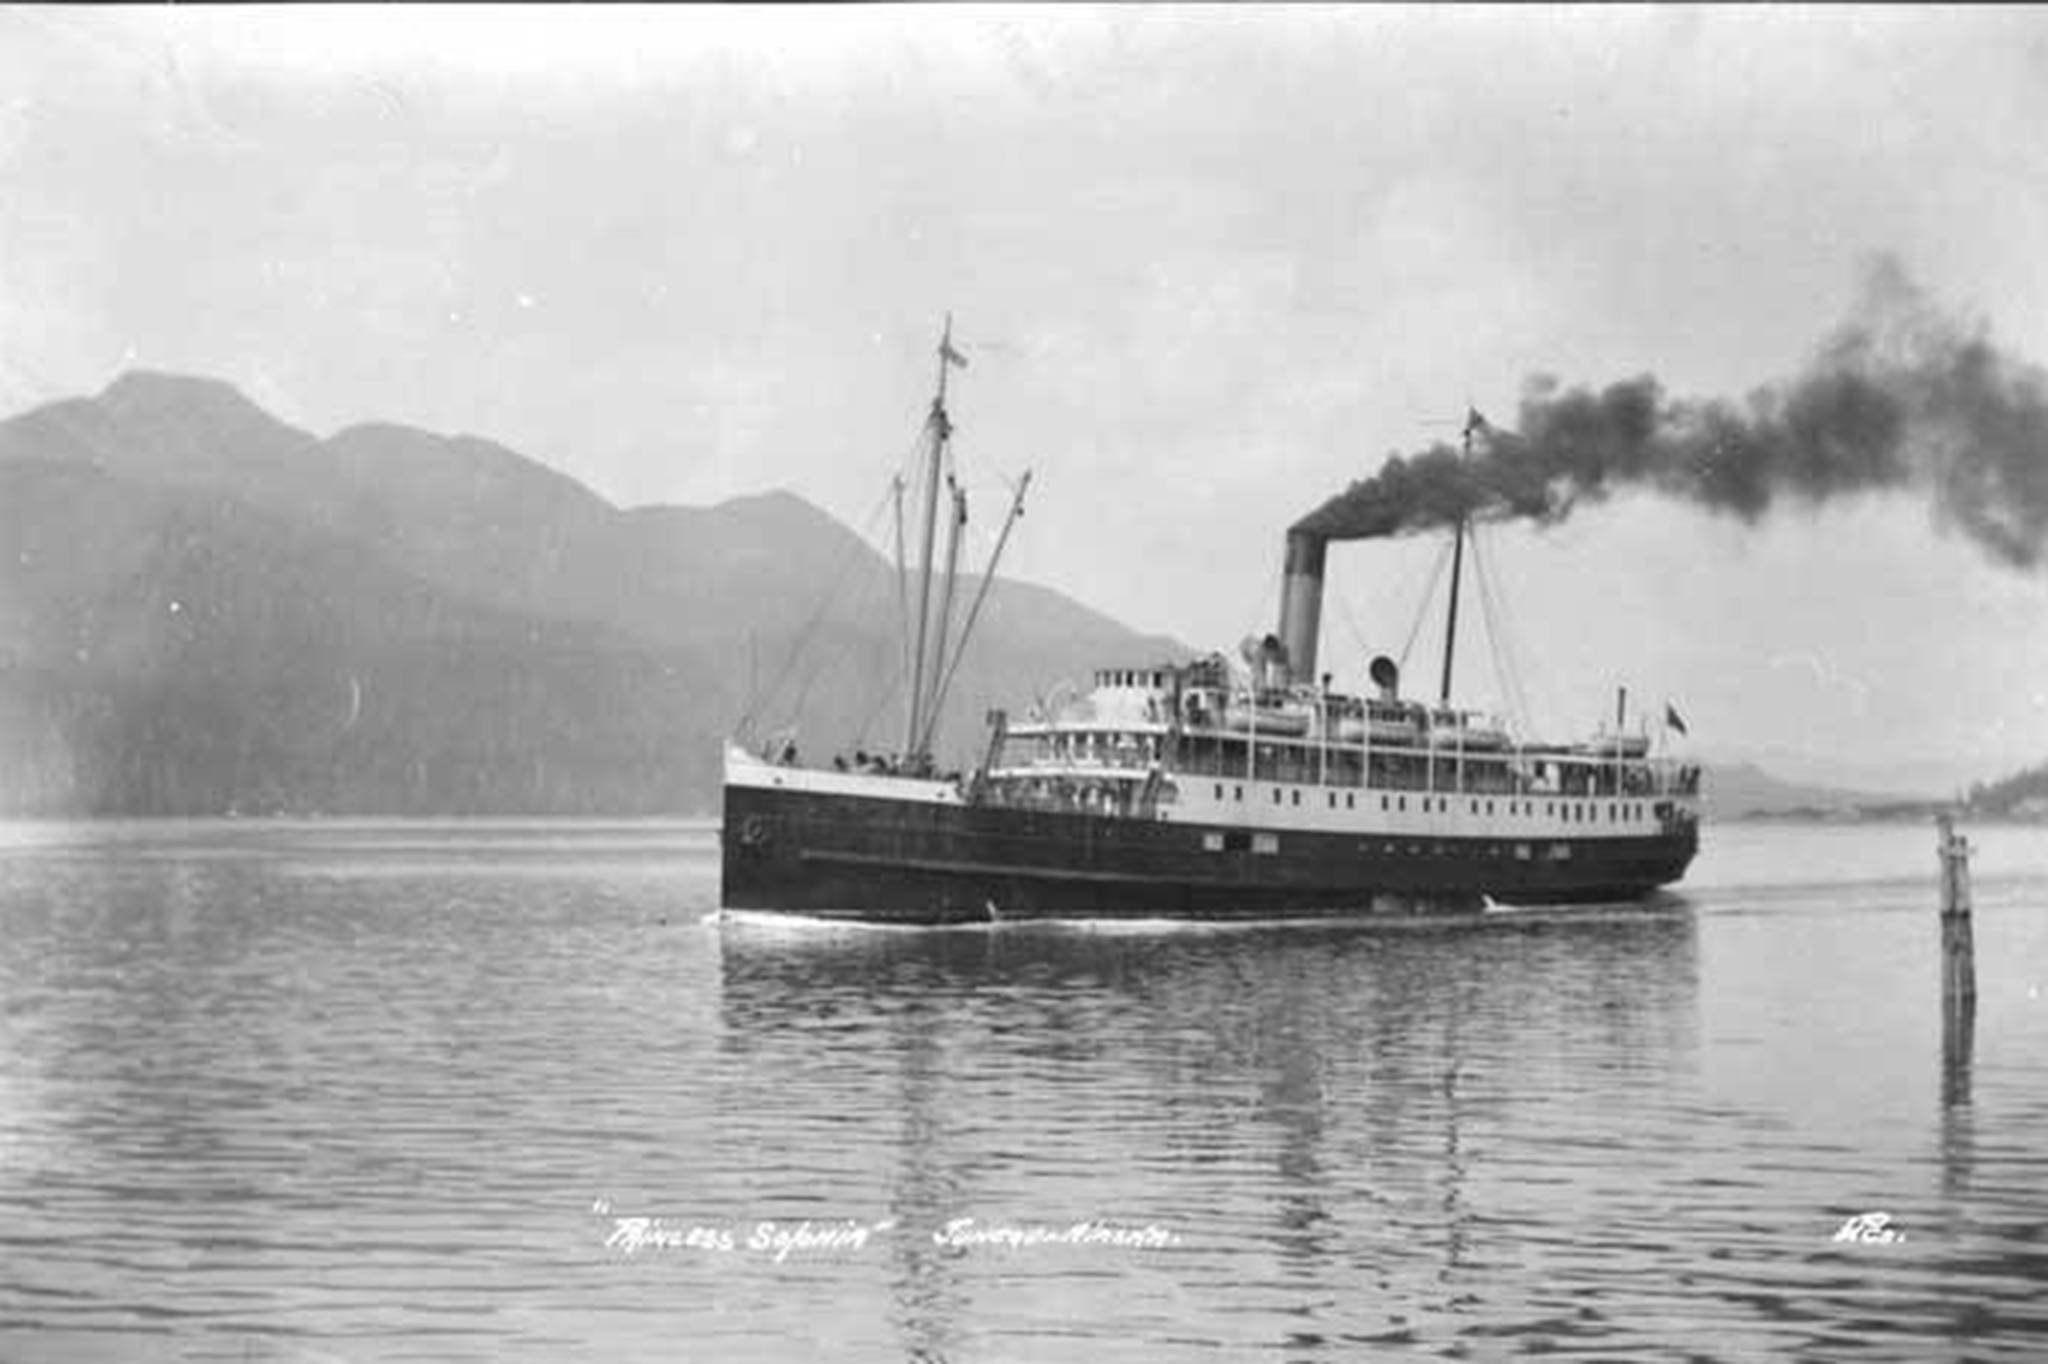 A view of the Princess Sophia’s port side, The ship, which was bound for Seattle, struck Vanderbilt Reef because of a confluence of conditions, including a late train and poor visibility. The ship sunk Oct. 25 1918. (Alaska State Library-Historical Collections, ASL-P87-1699)